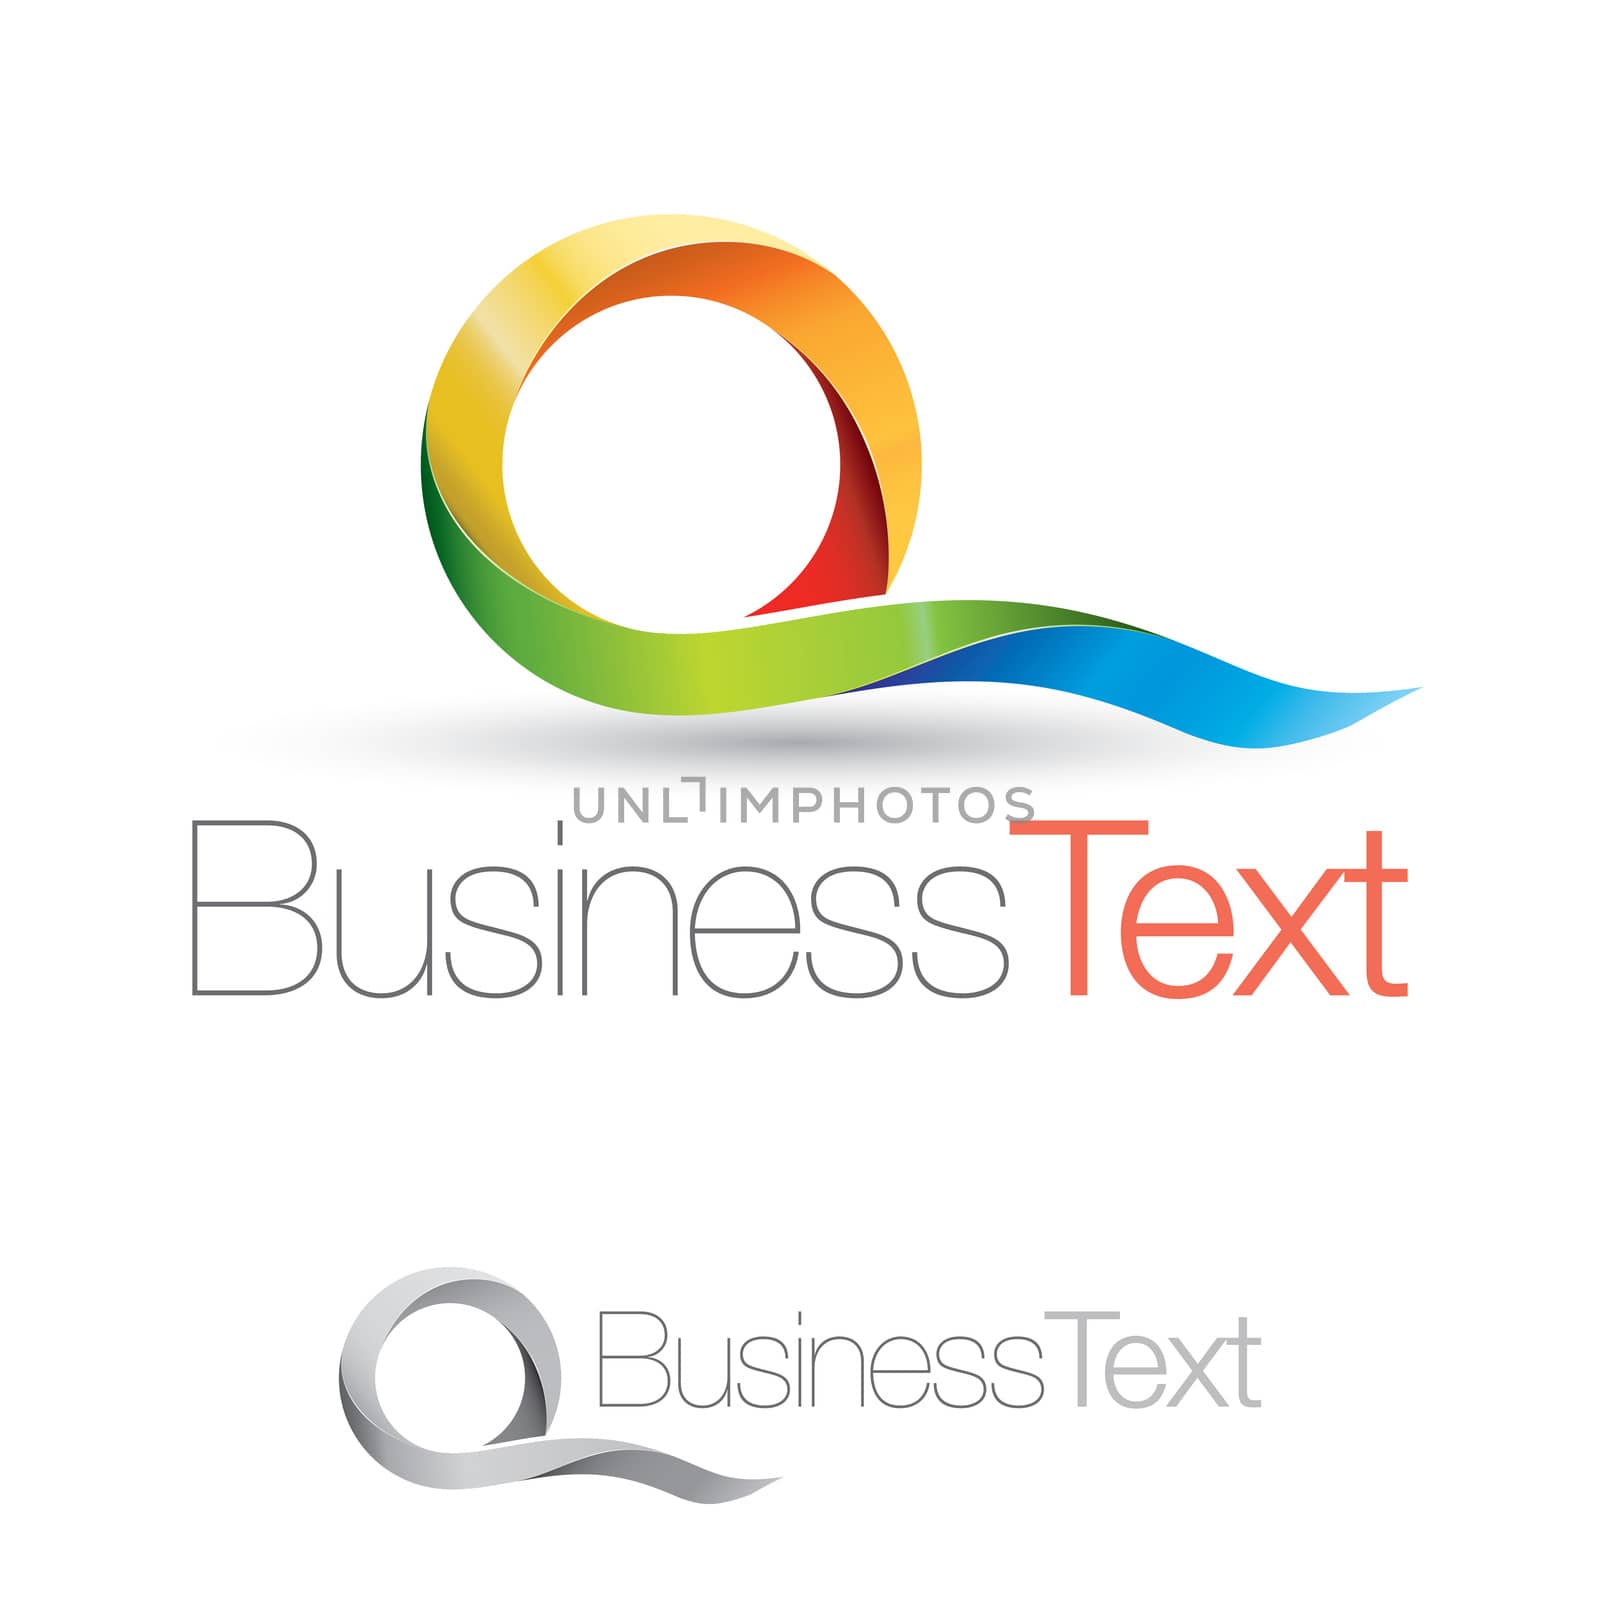 Abstract business icon with colorful and stylized letter Q